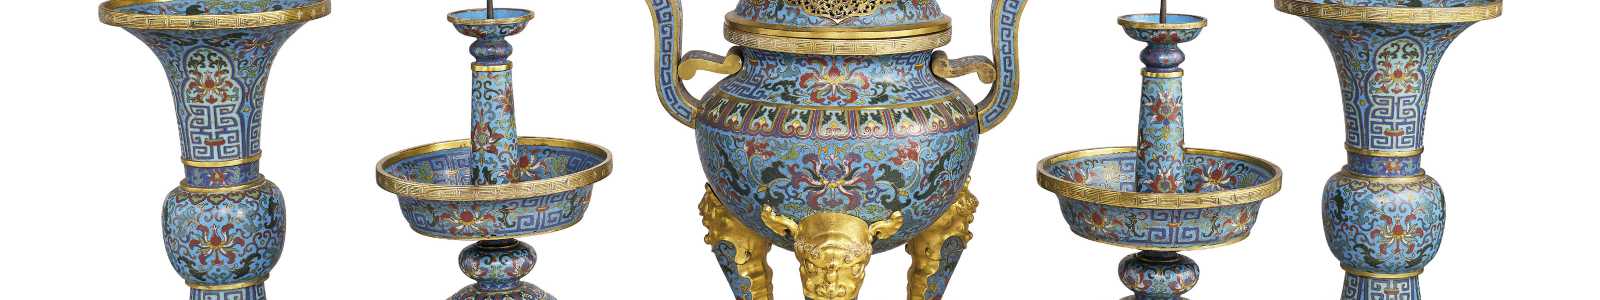 Important Chinese Ceramics and Works of Art